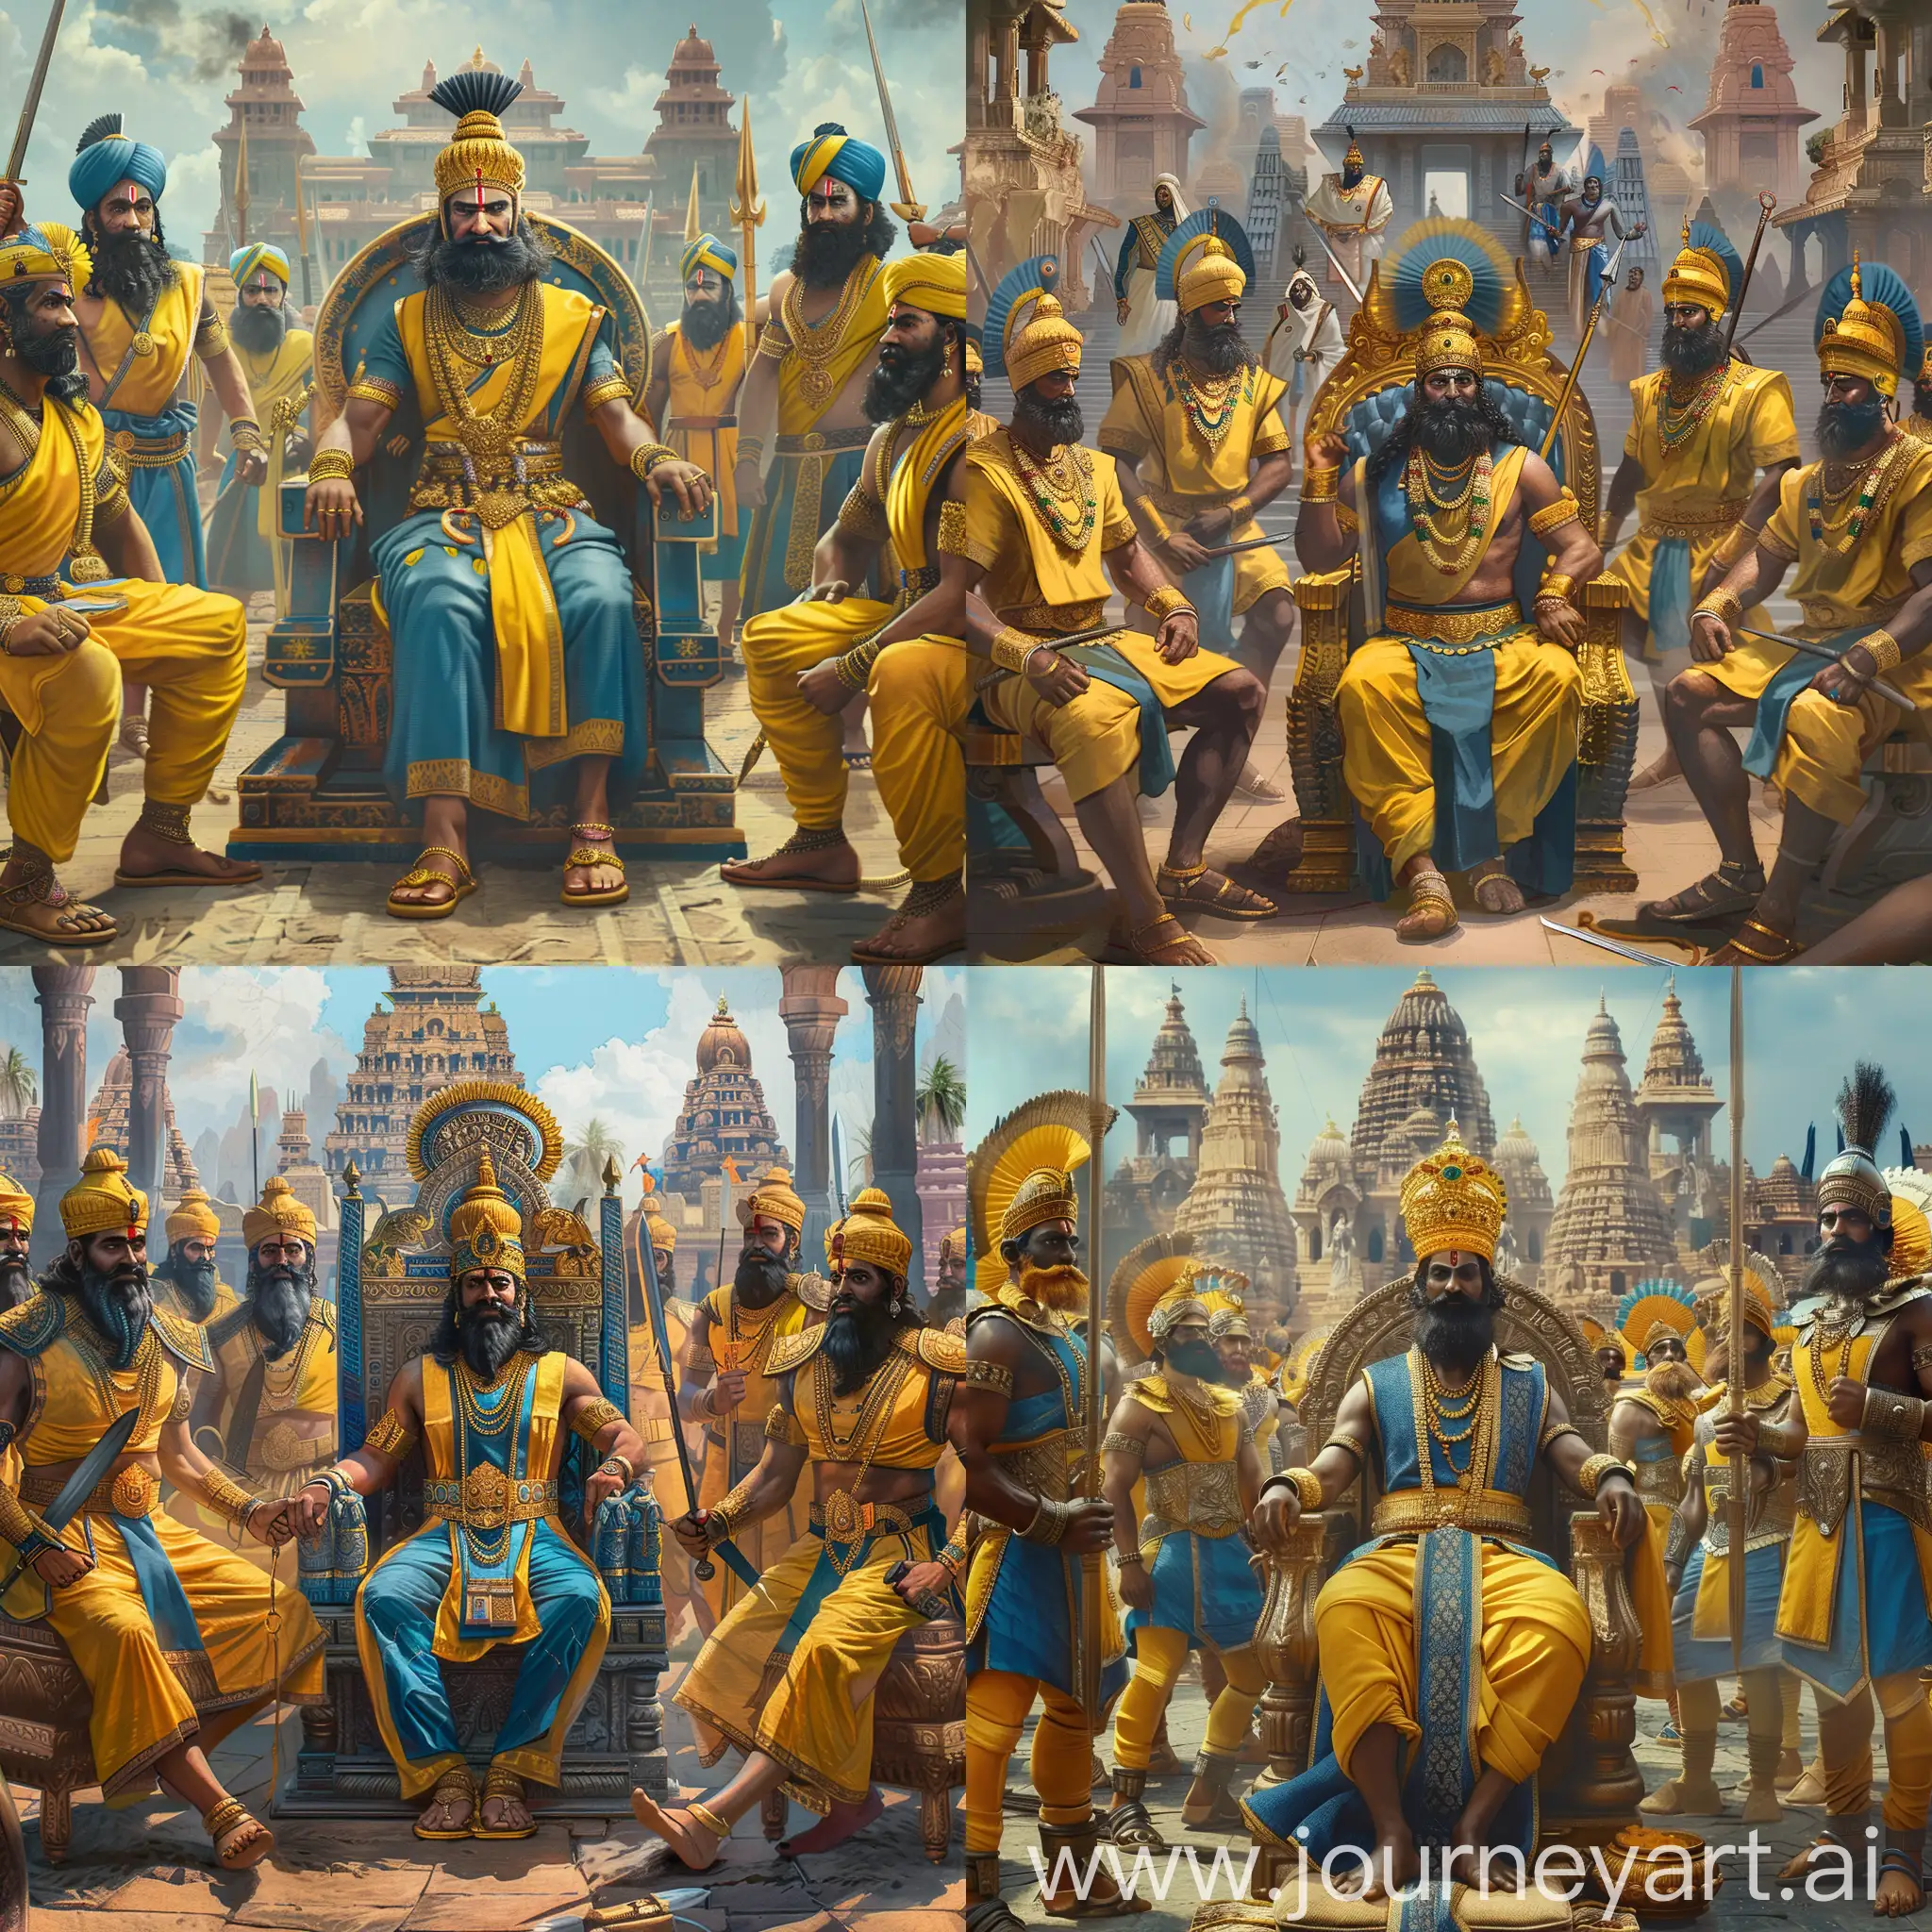 South-Indian-Chola-Dynasty-King-and-Warriors-in-Ancient-Hindu-Palace